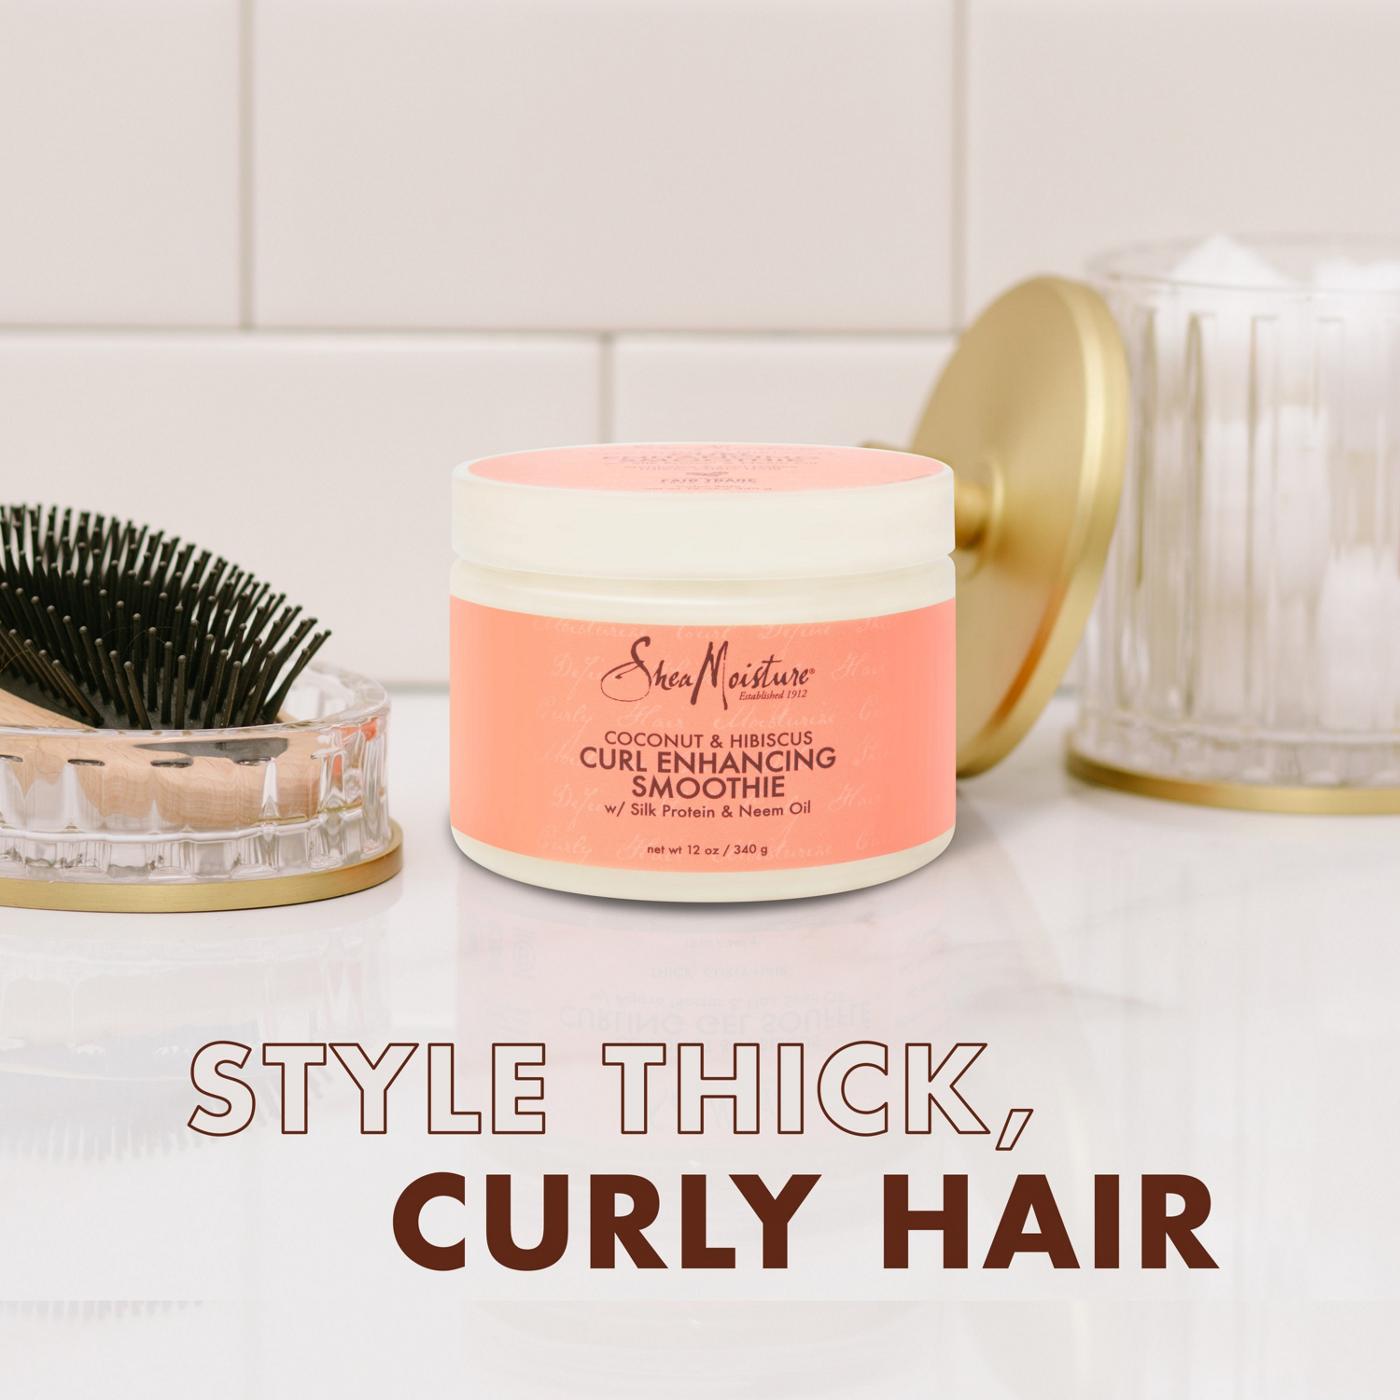 SheaMoisture Smoothie Curl Enhancing Cream - Coconut and Hibiscus; image 4 of 10